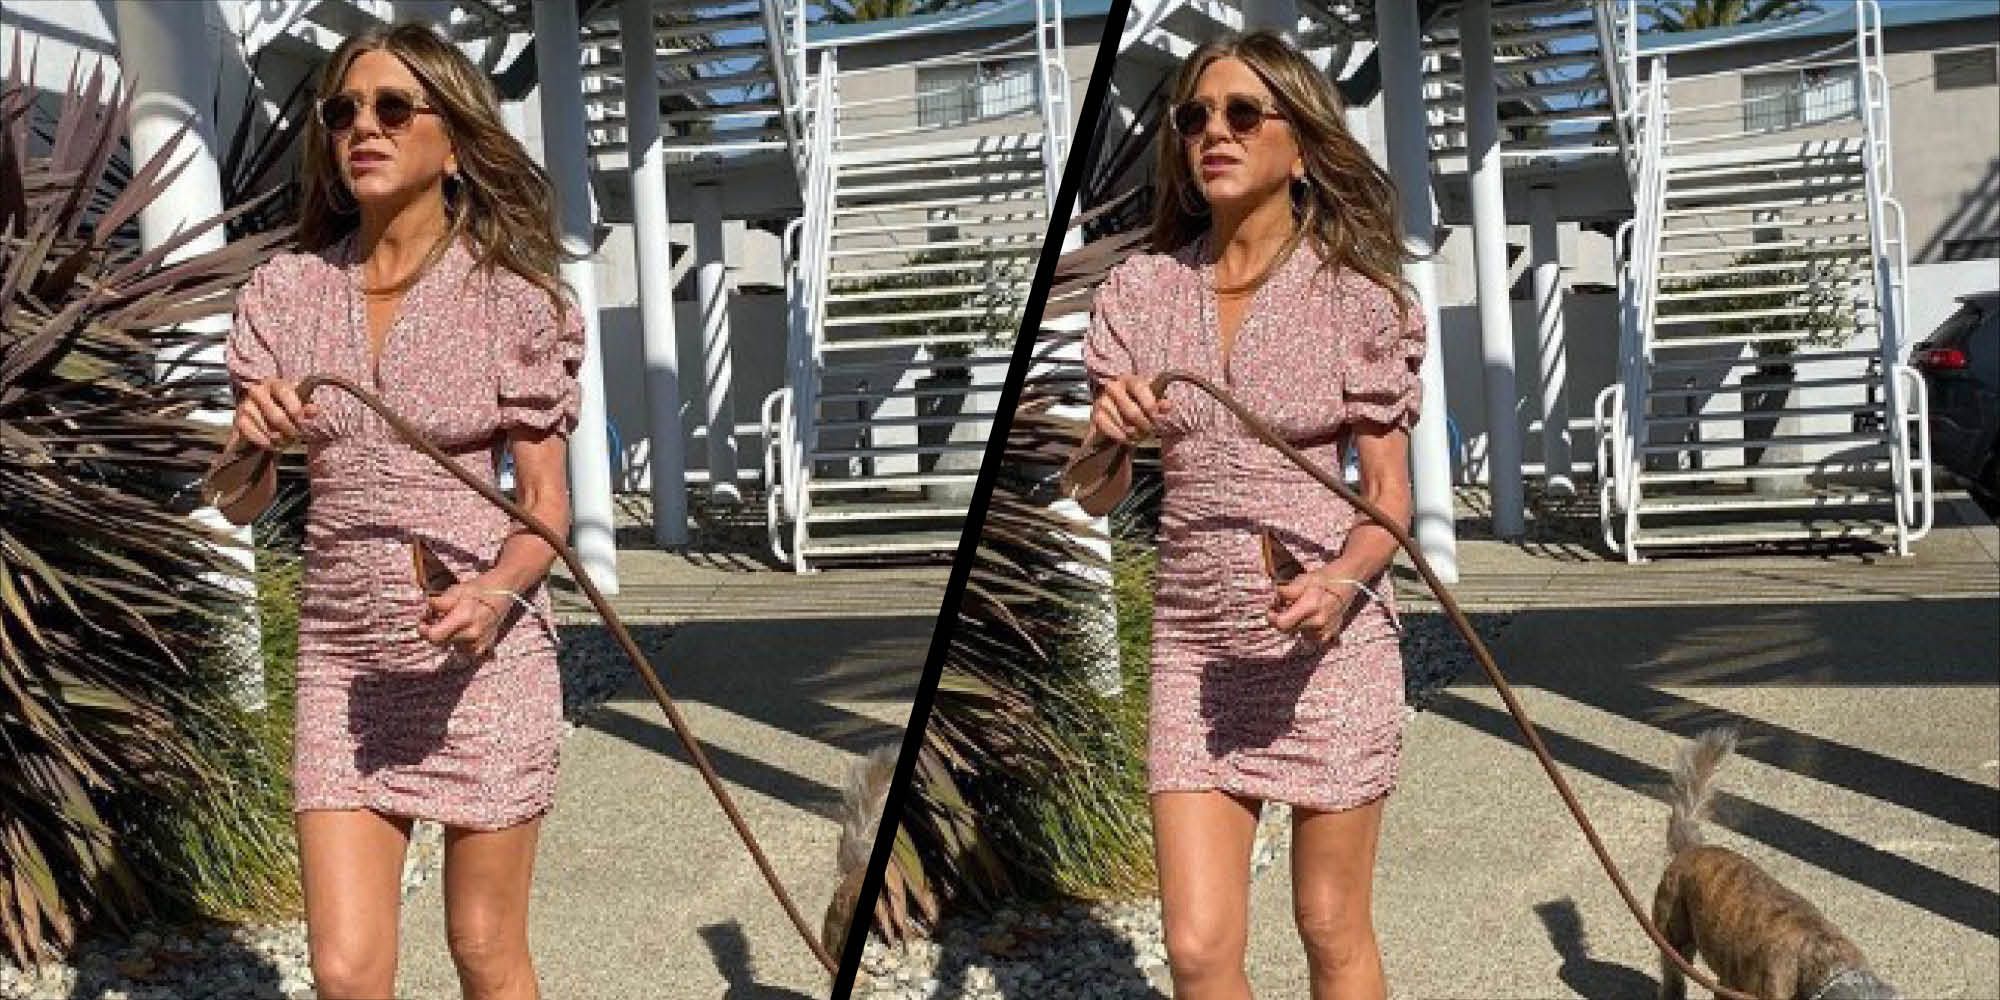 Jennifer Aniston Nude Beach Walk - Jennifer Aniston stepped out of her style comfort zone in a ruched floral  dress